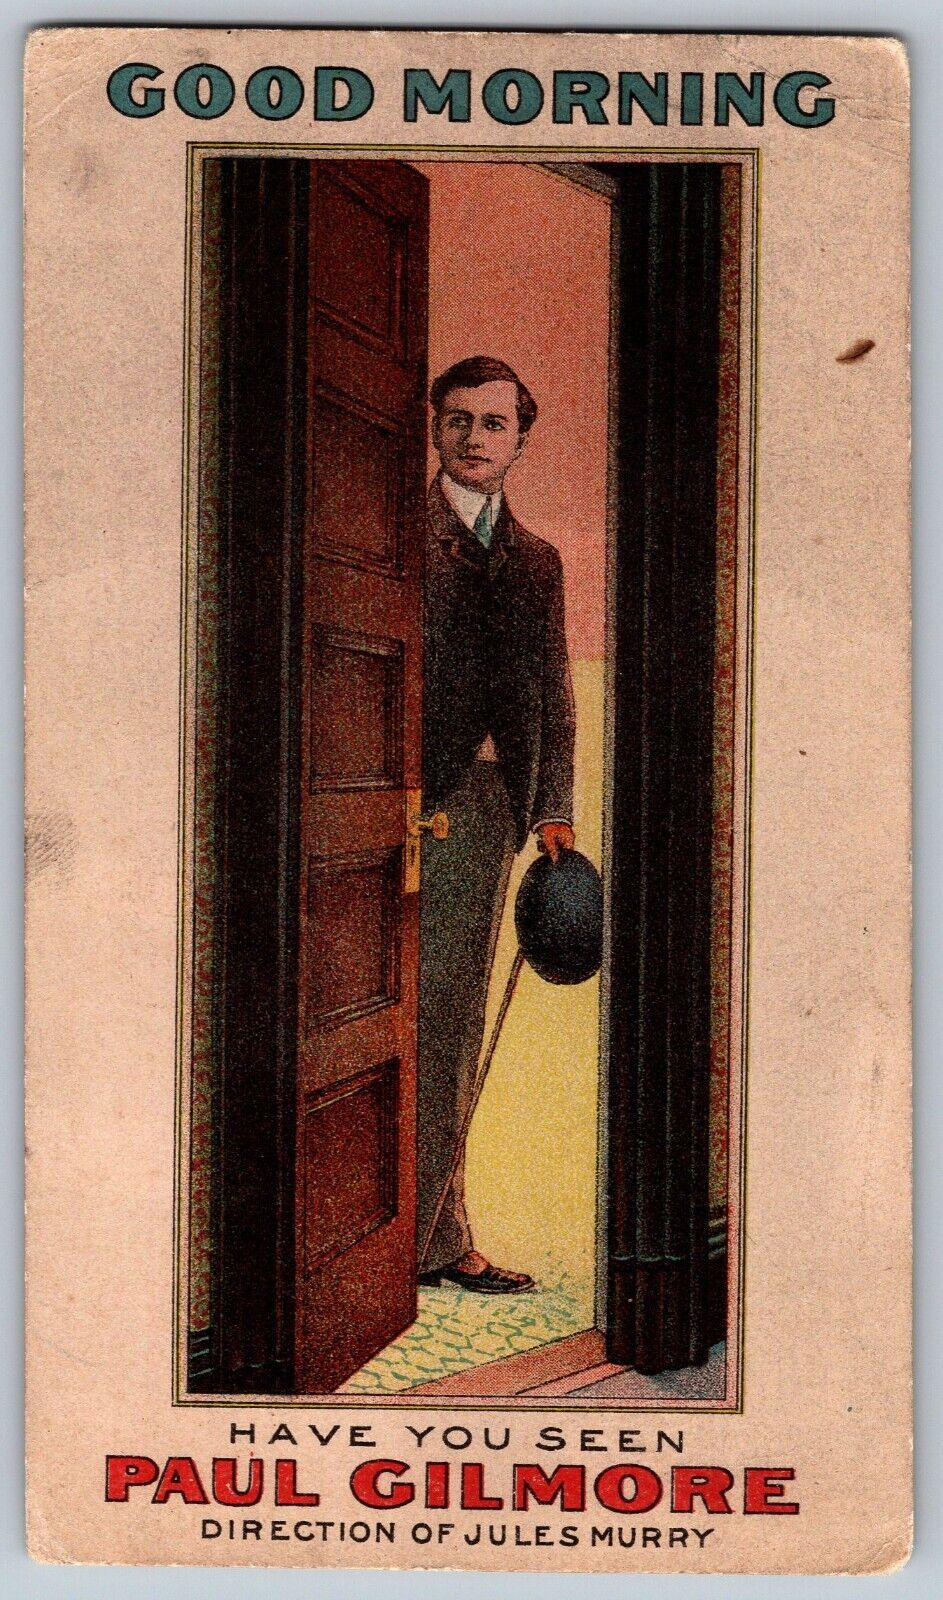 Good Morning - Greetings - Paul Gilmore - Director - Vintage Postcard - Unposted